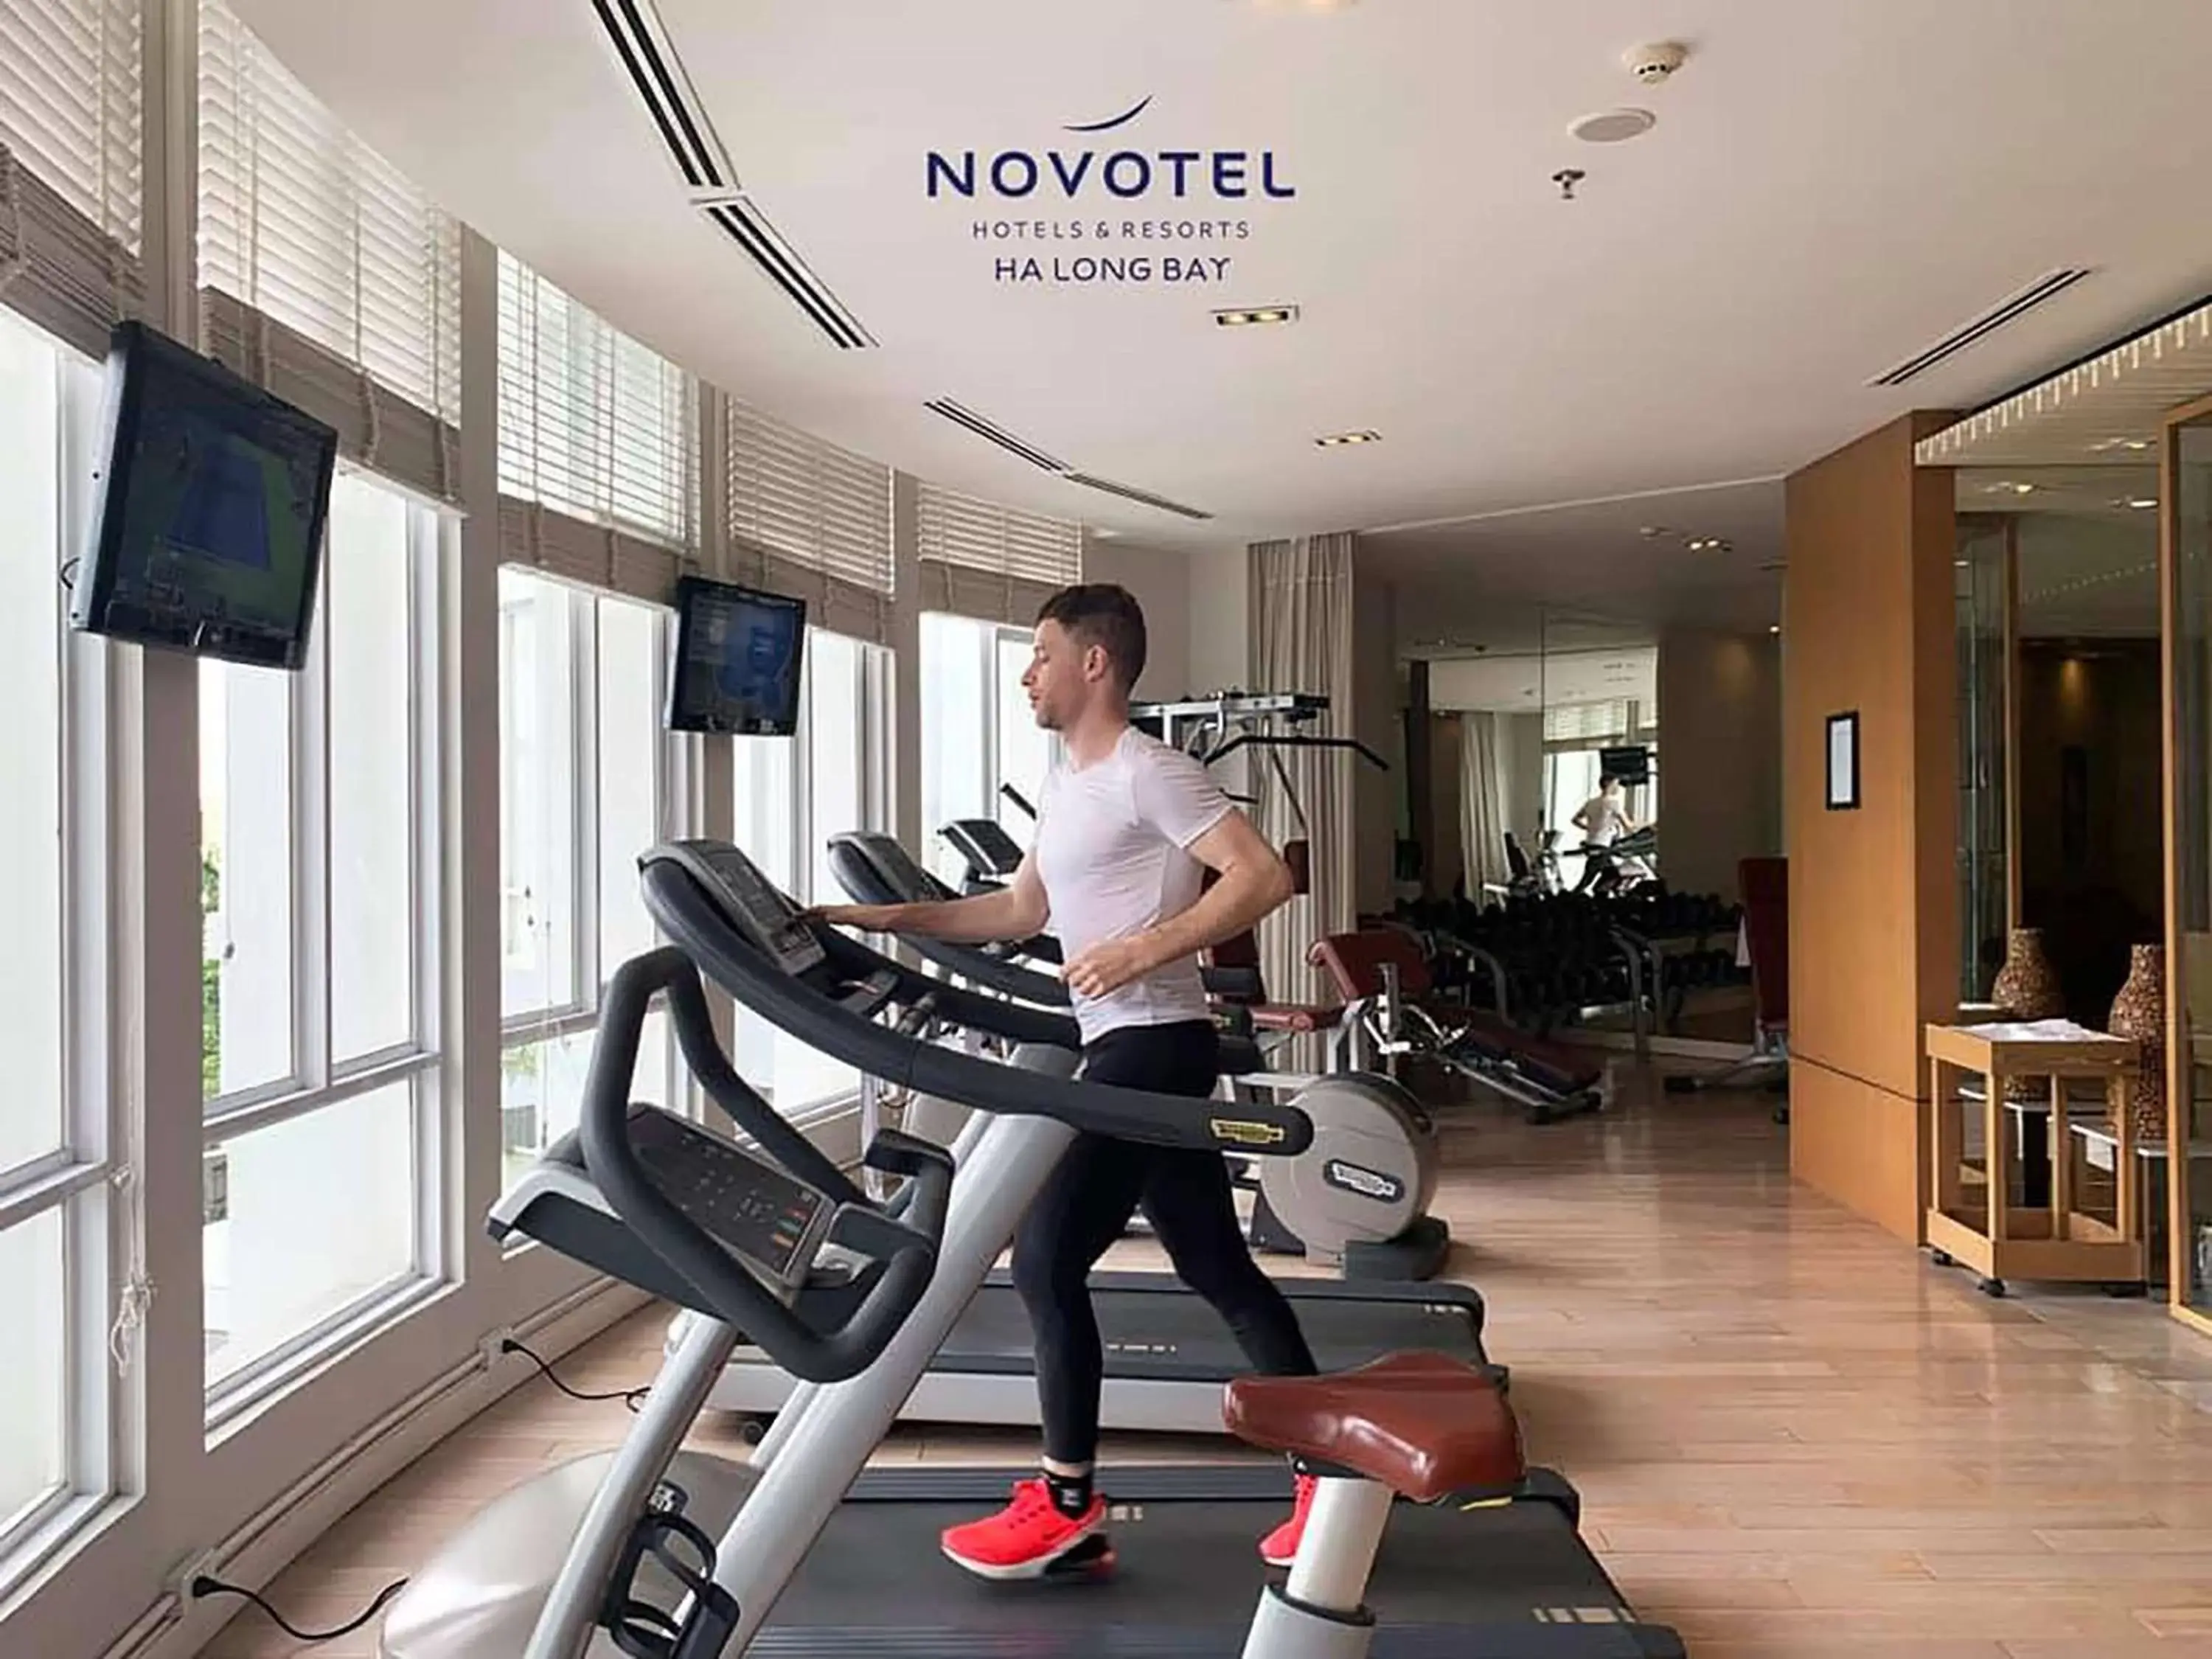 On site, Fitness Center/Facilities in Novotel Ha Long Bay Hotel